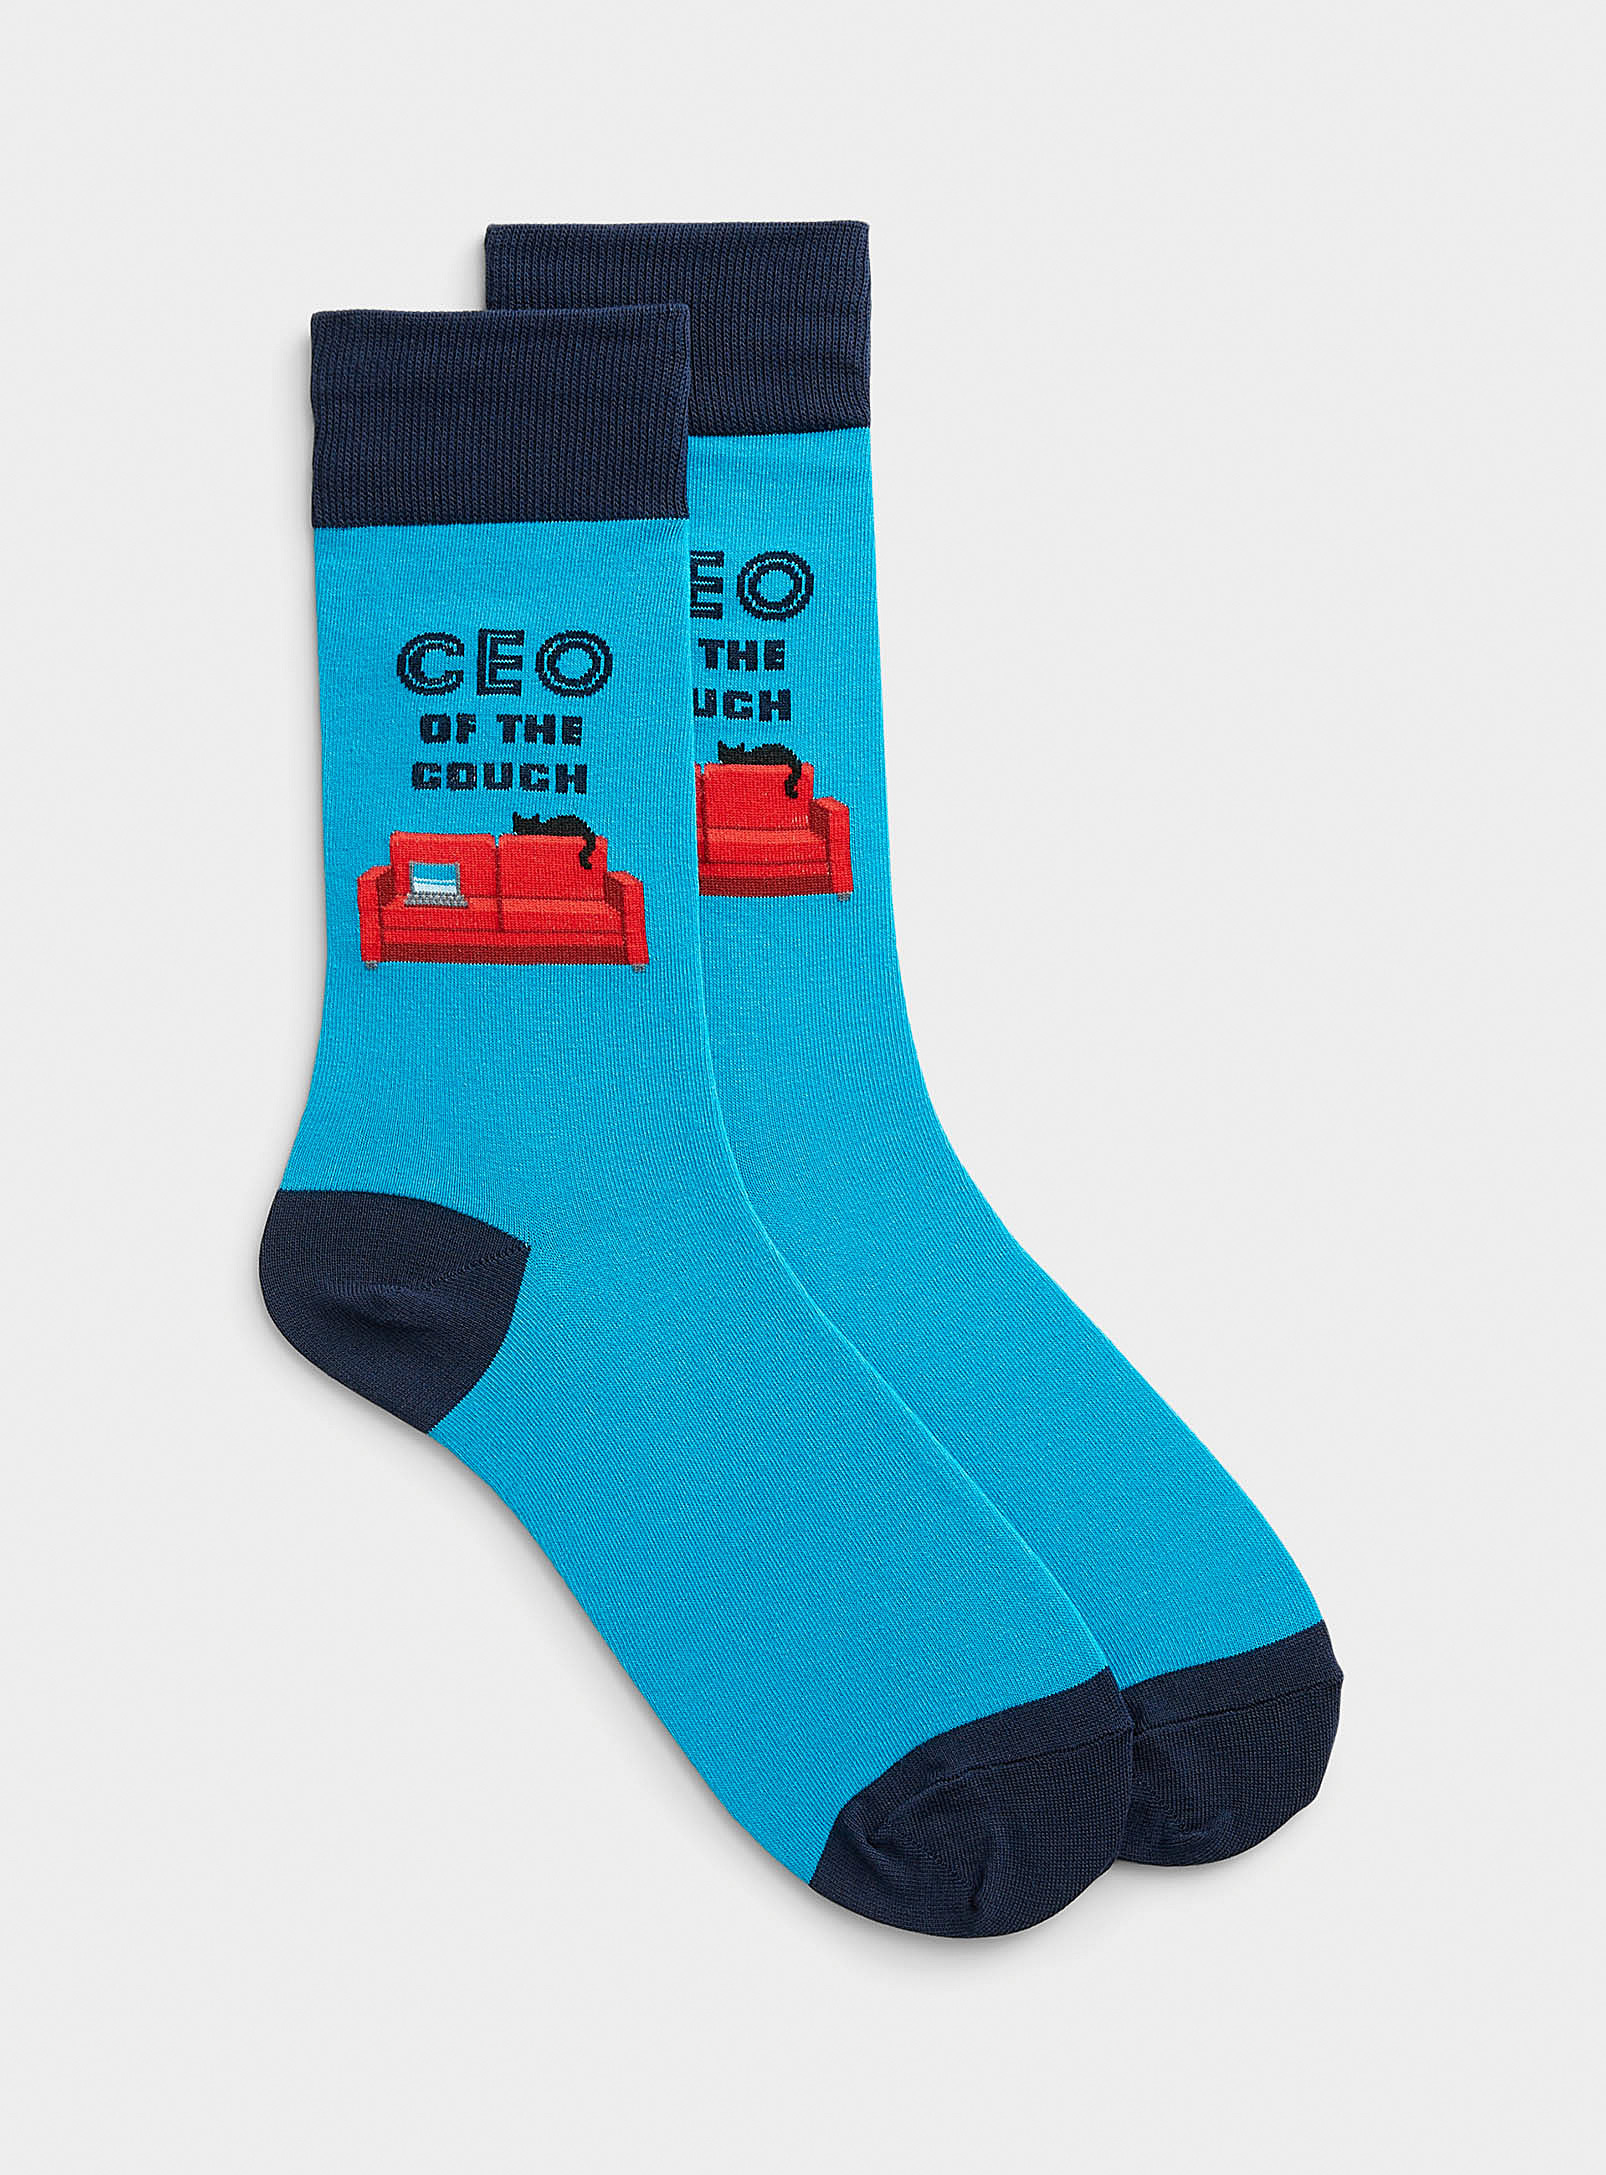 Hot Sox - Men's CEO of the couch sock